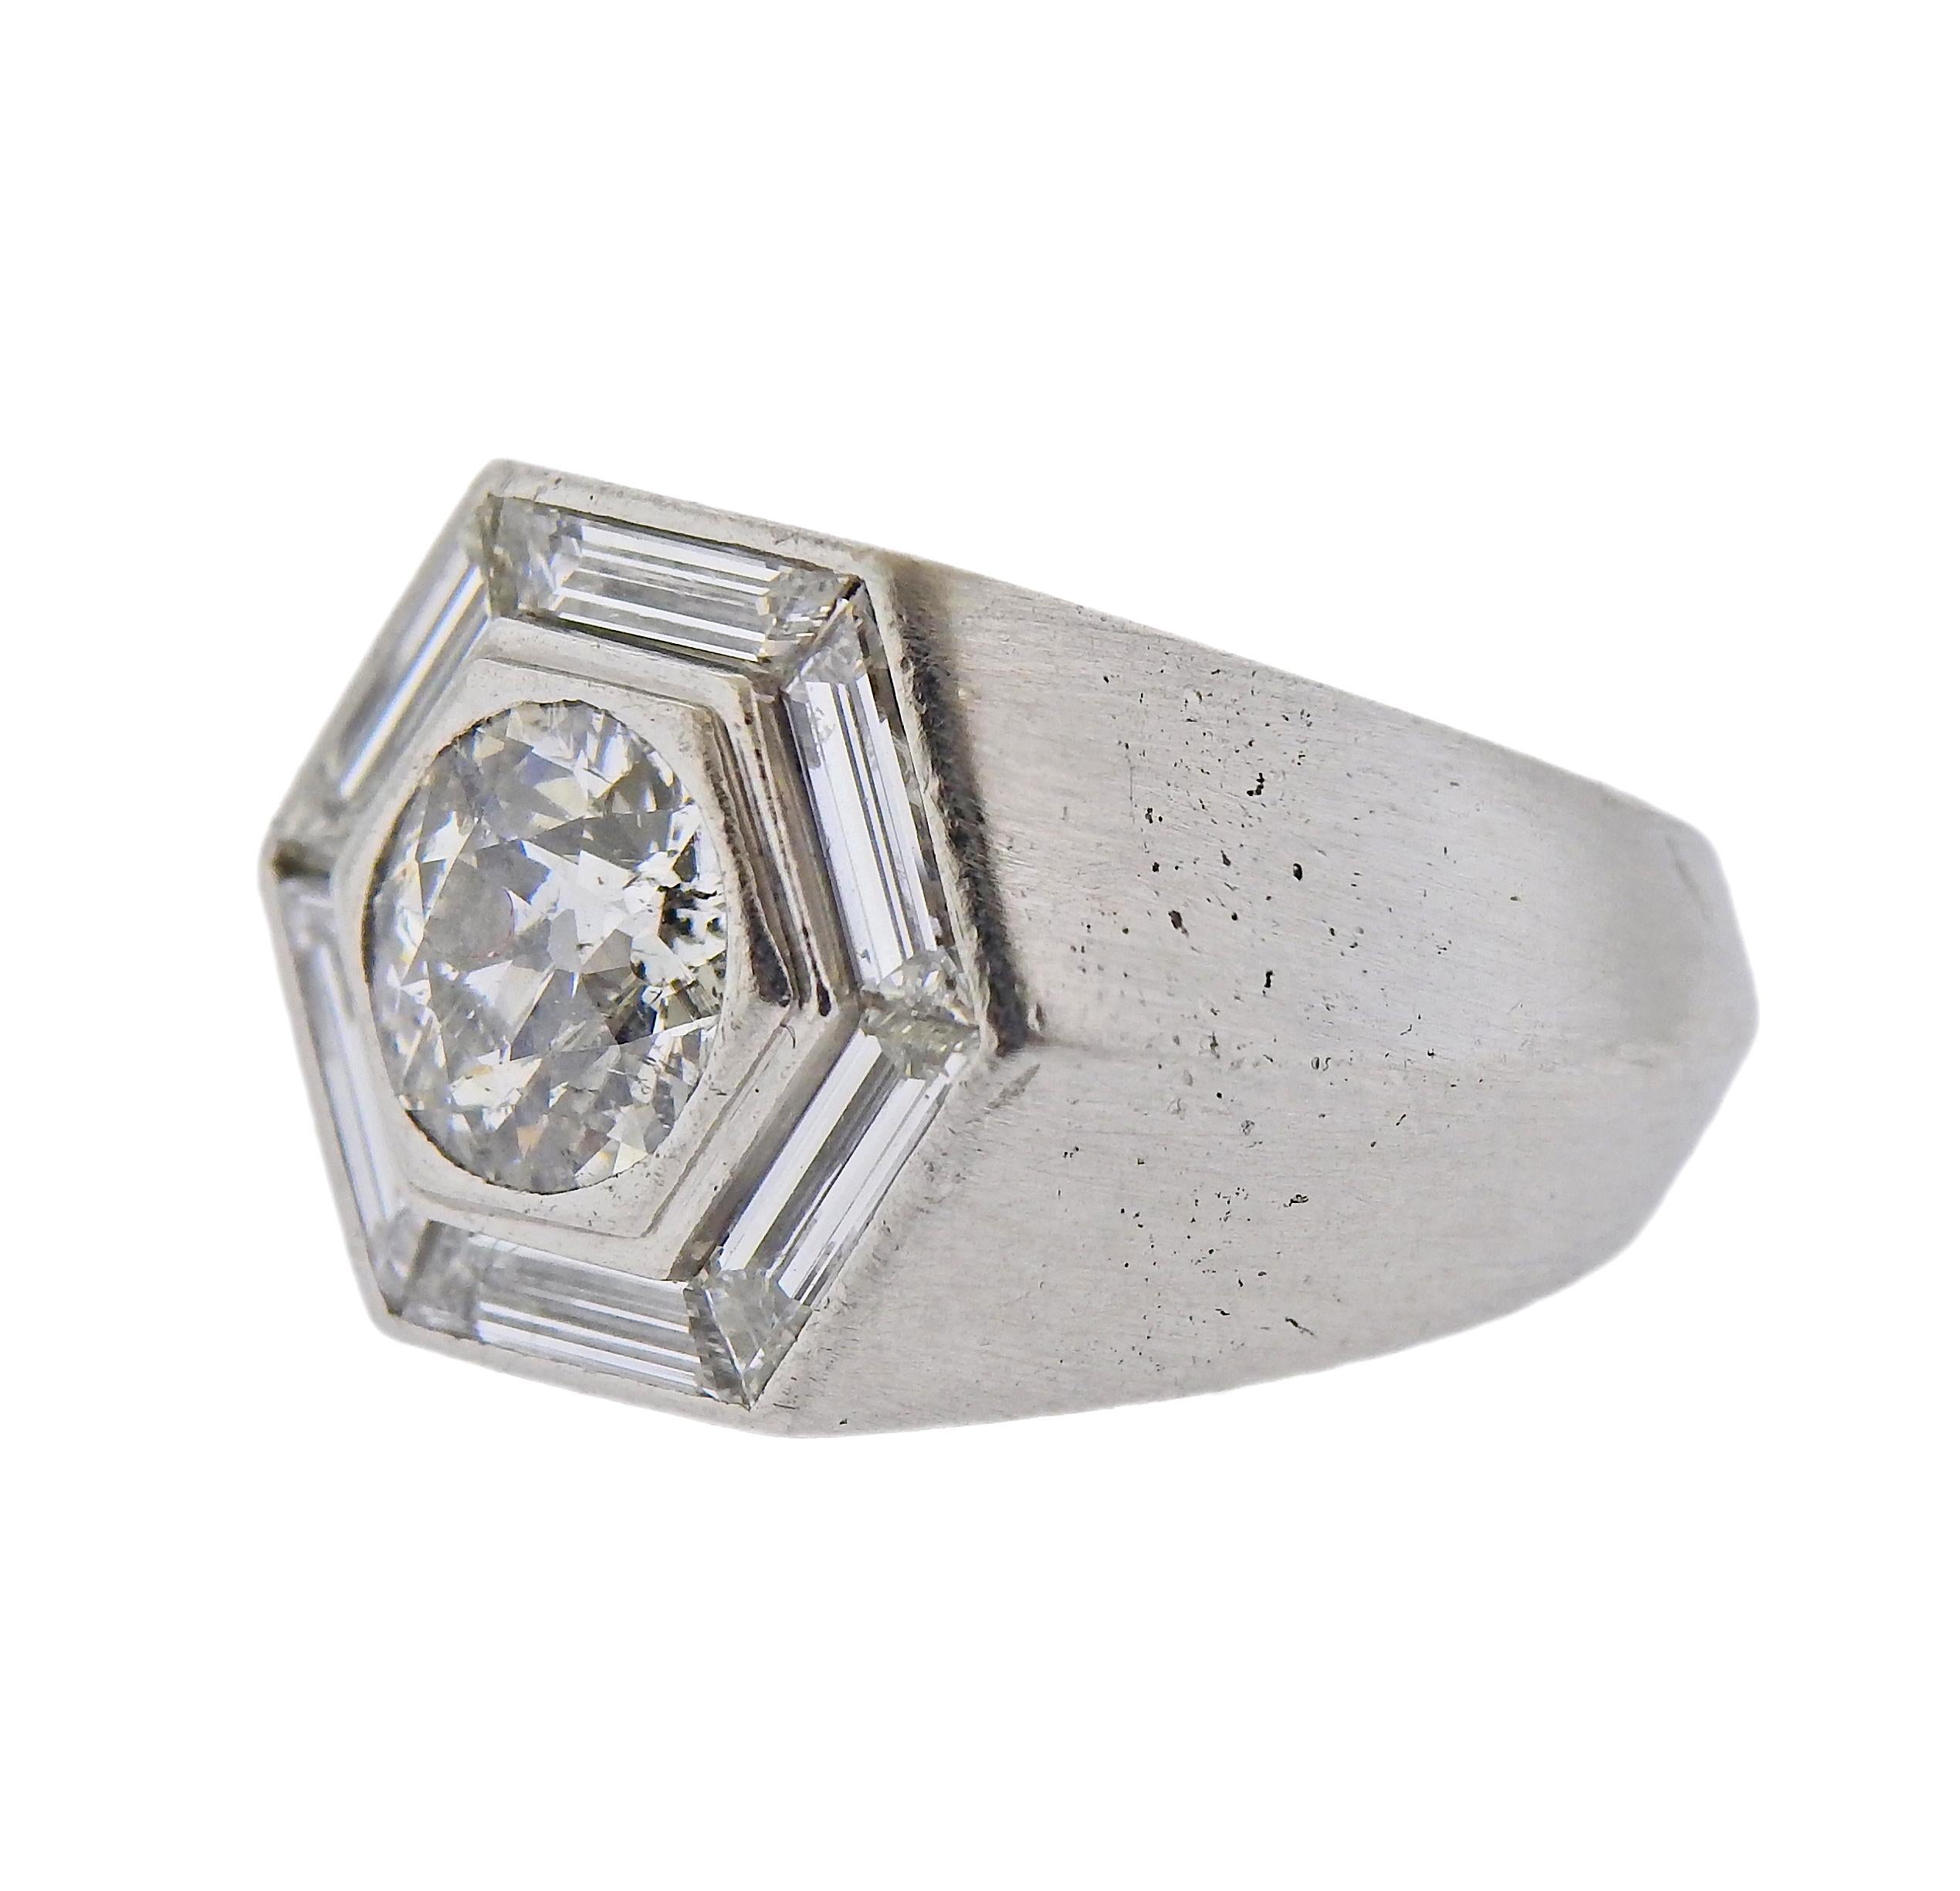 Platinum Cartier ring, with center approx. 1.72ct diamond, surrounded with baguette diamonds. Ring size - 6, ring top is 15mm wide. Marked: Cartier. Weight - 23.4 grams.